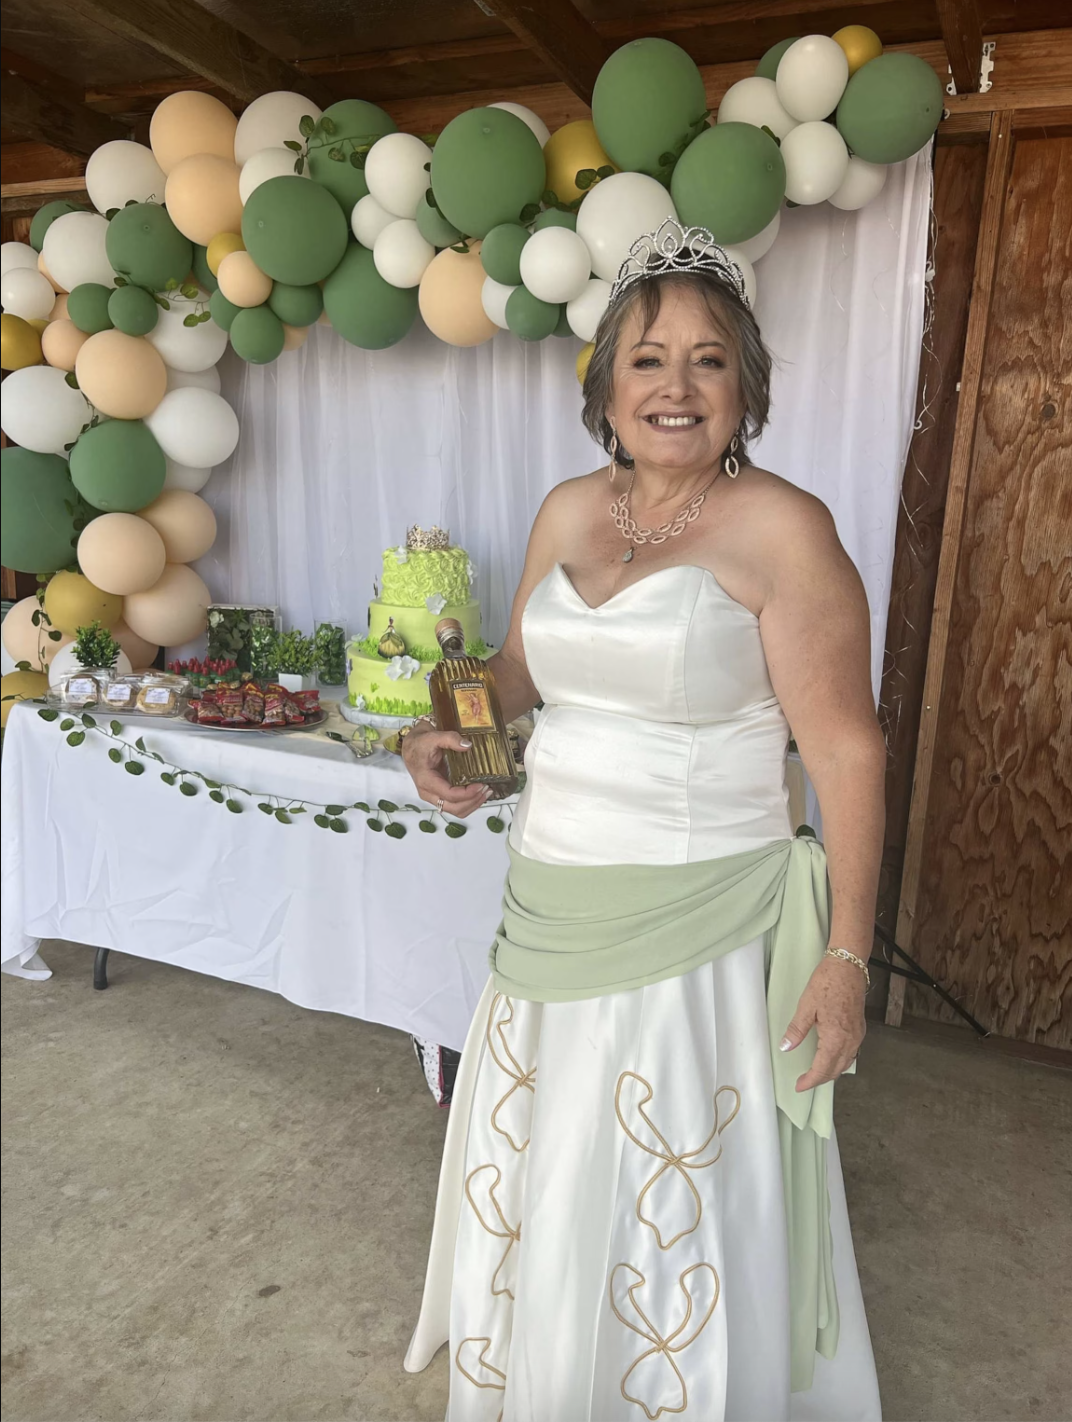 60-Year-Old Woman Celebrates Milestone Birthday with a Surprise “Quinceañera”.